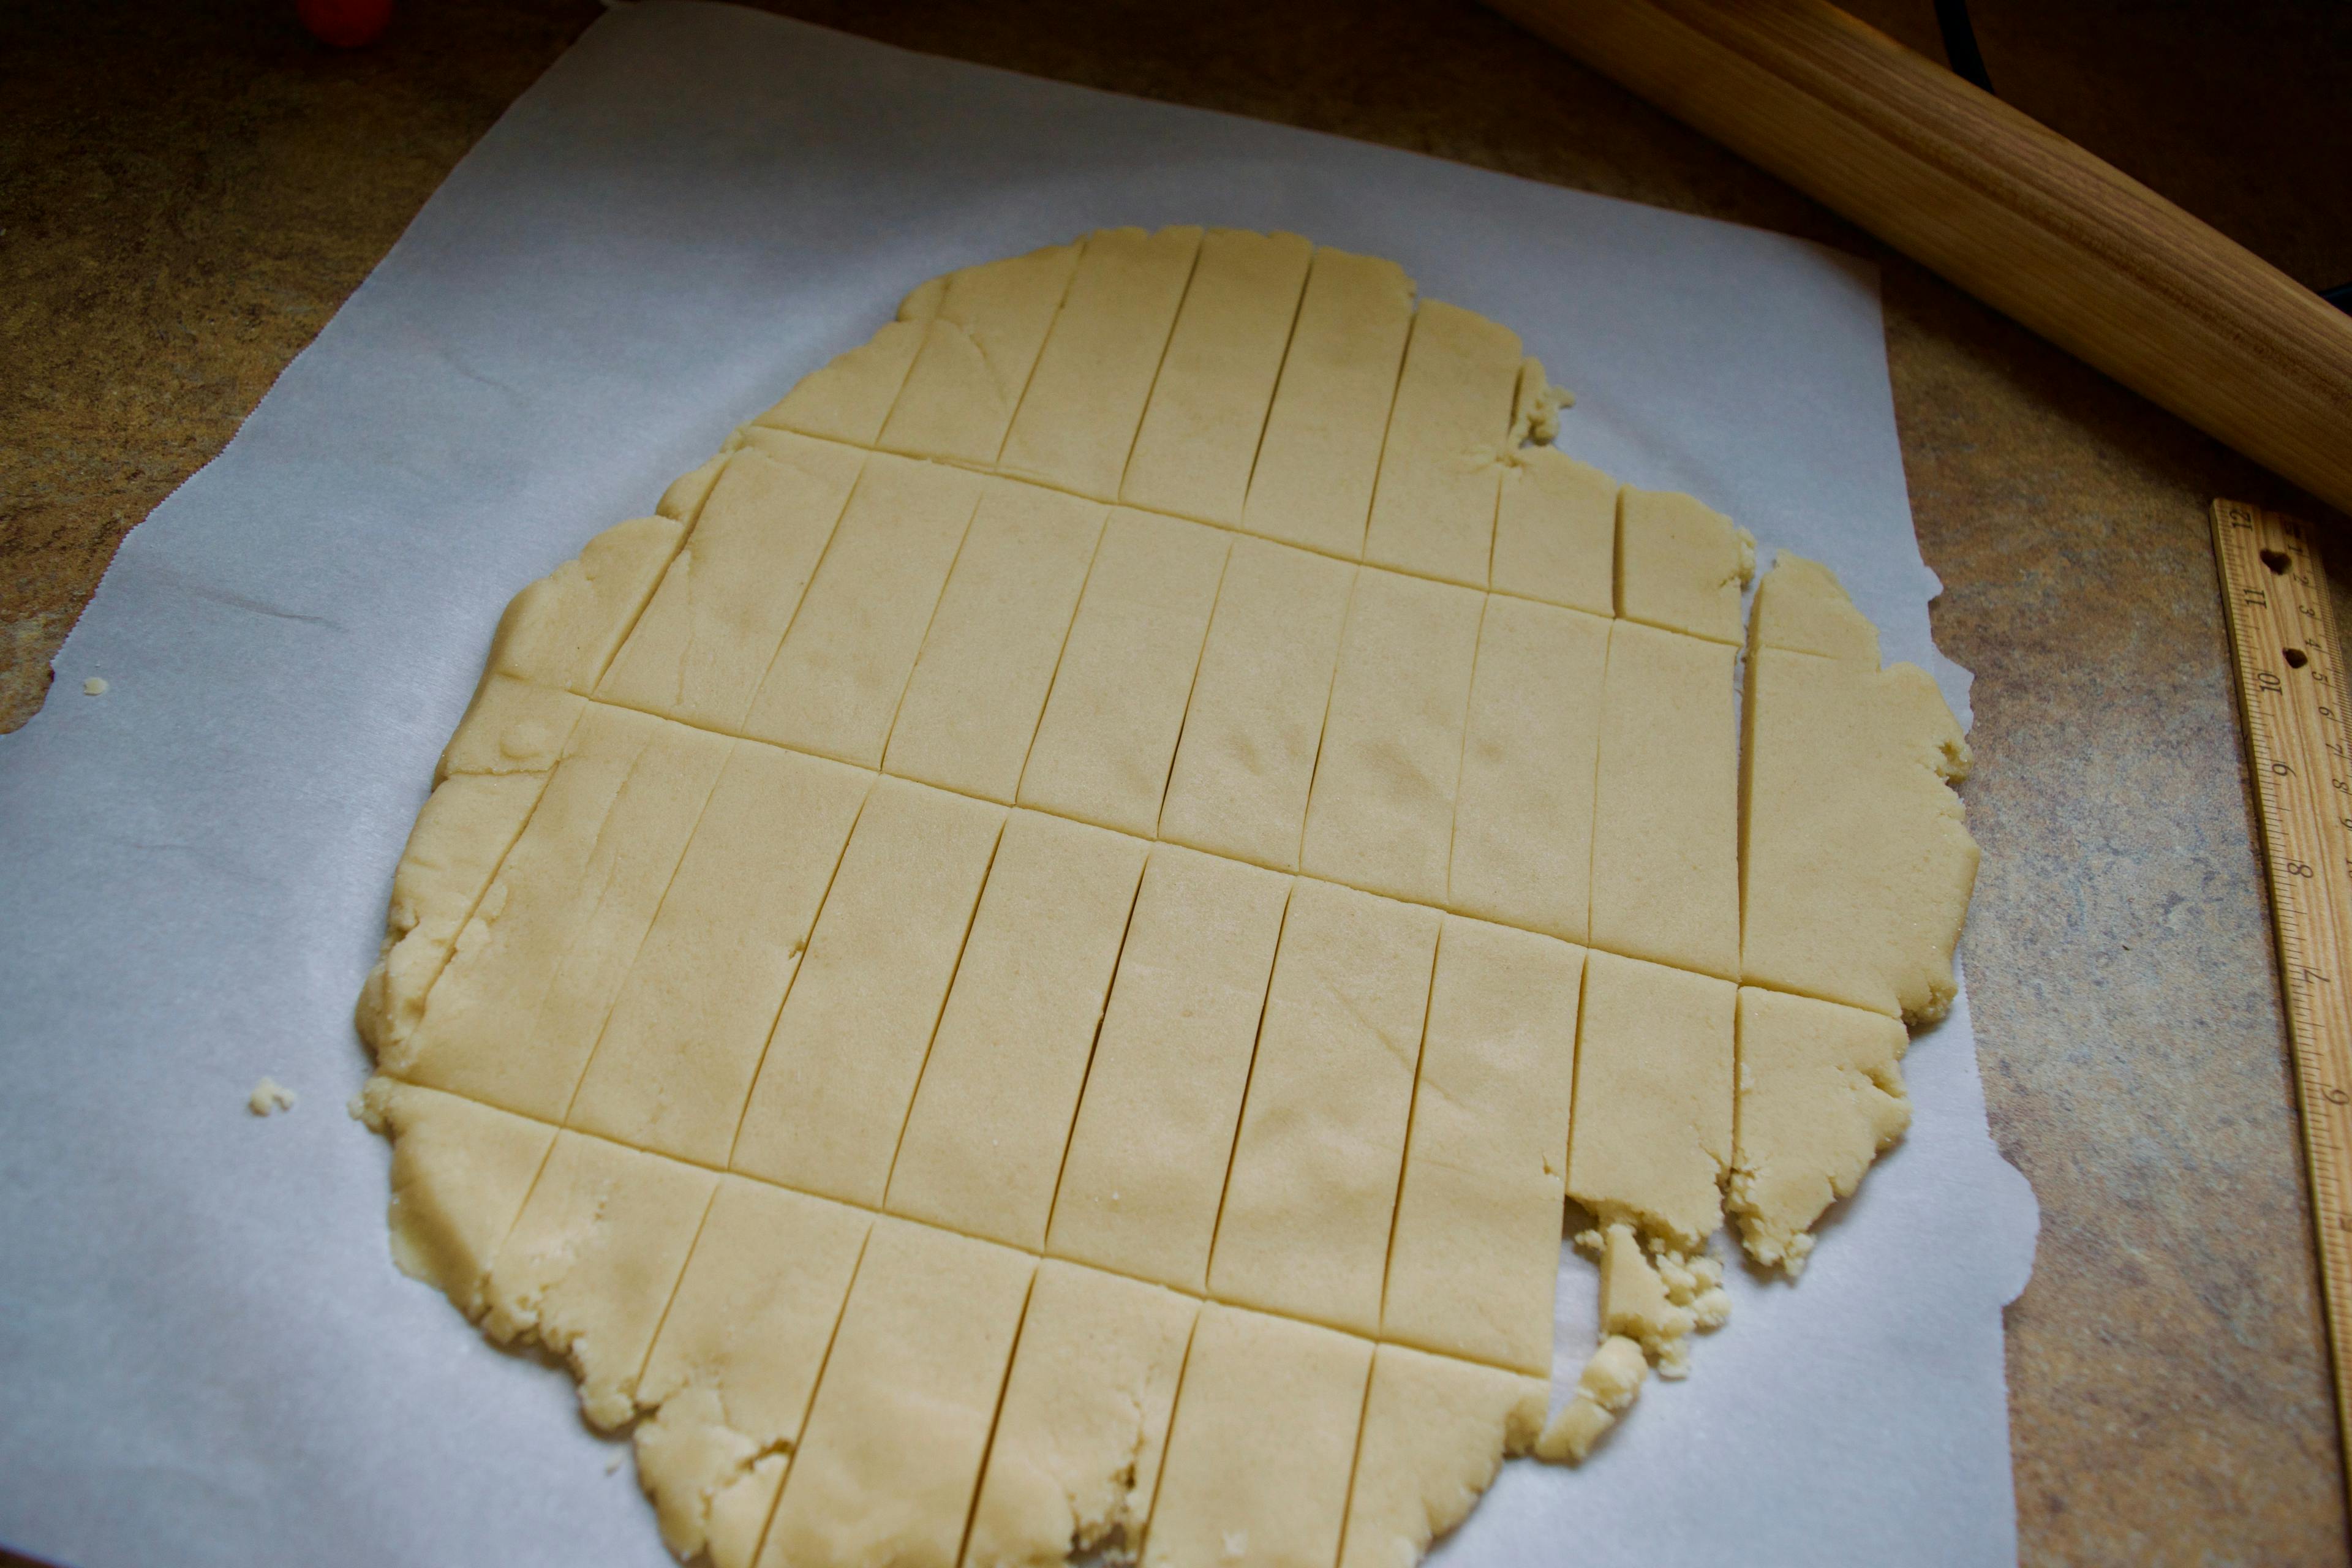 Shortbread dough rolled out thin on parchment paper and cut into rectangles